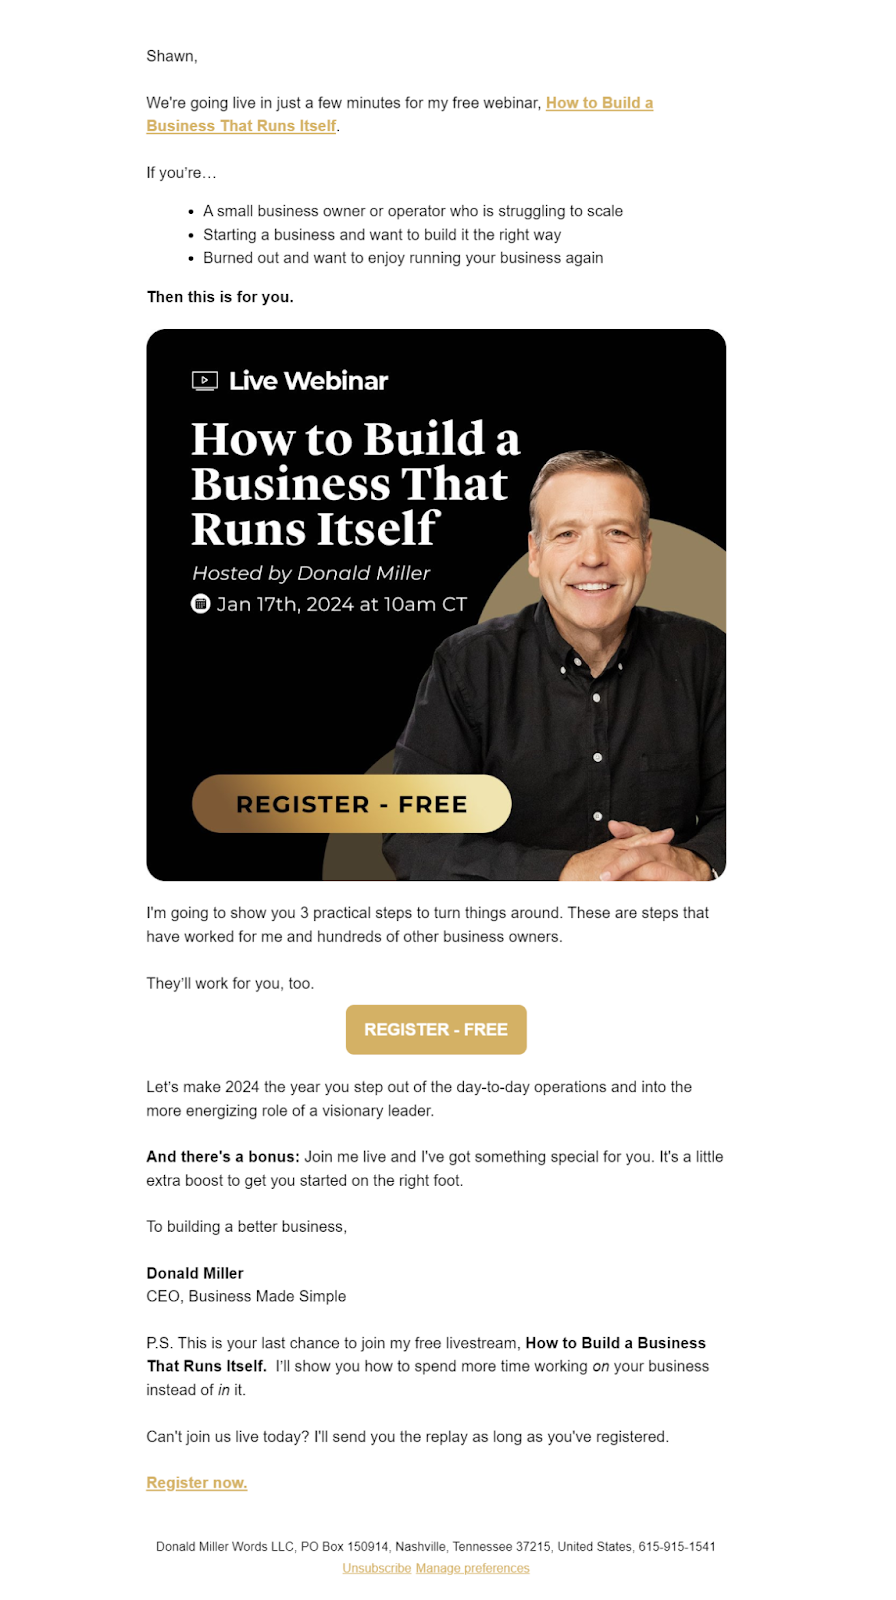 How to Write Great Webinar Email Sequences: 12 Webinar Email Templates and Examples